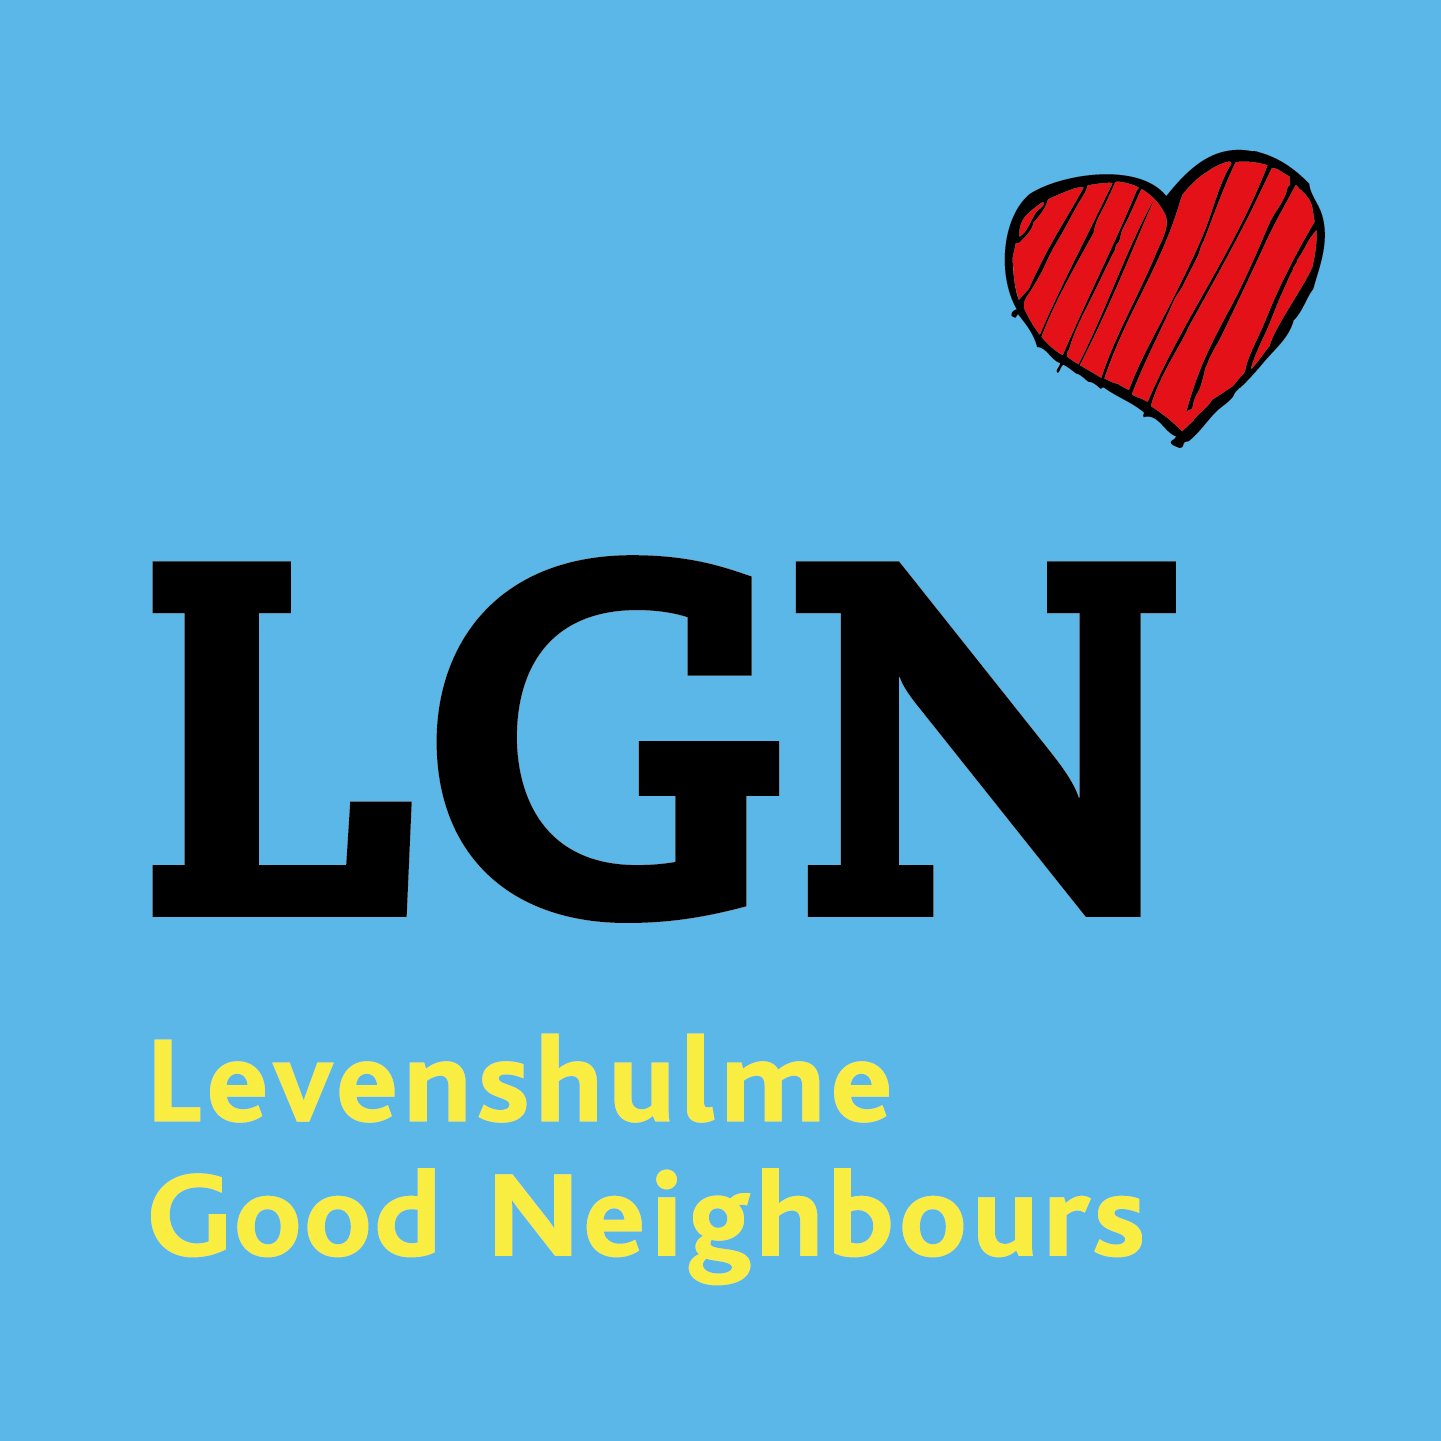 Levenshulme Good Neighbours is a care group and charity that works with volunteers to offer support to older people living in the Levenshulme, Manchester.